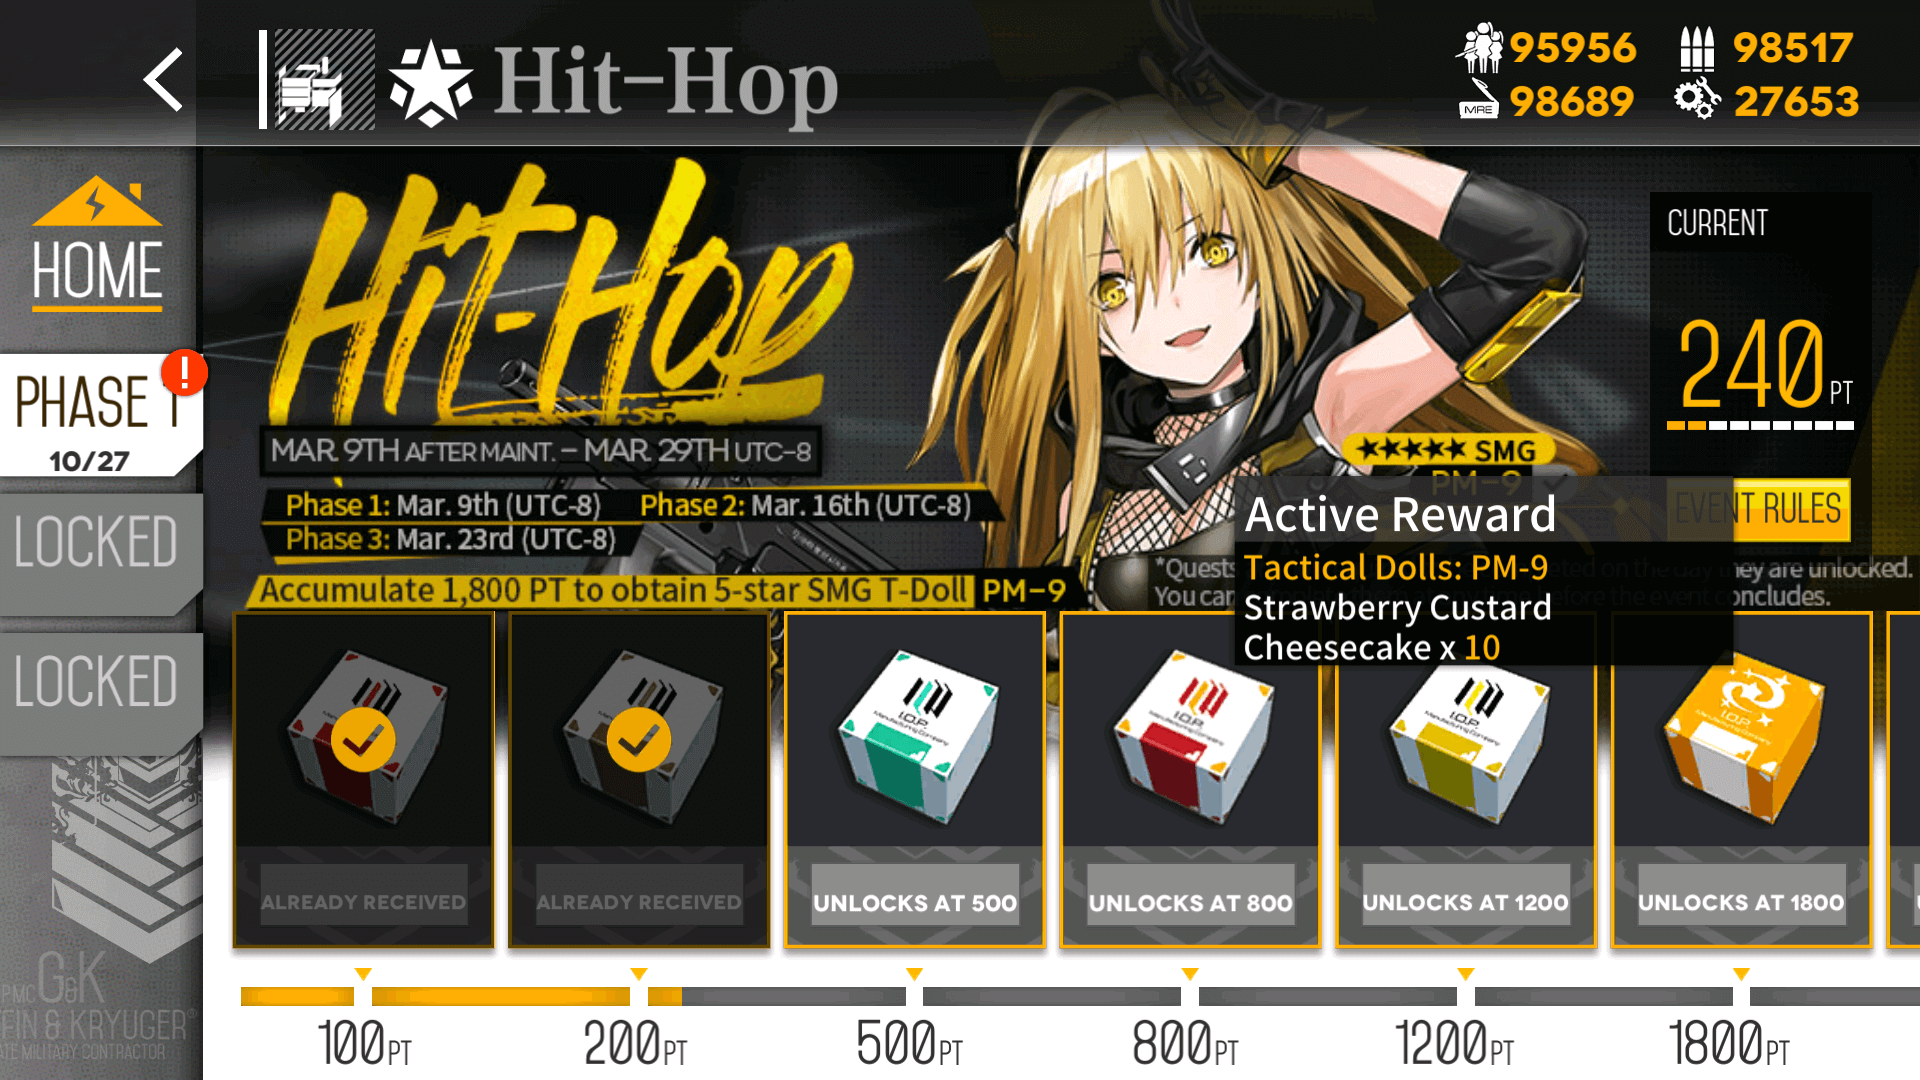 Event Rewards for the "Hit-Hop" Point Event.